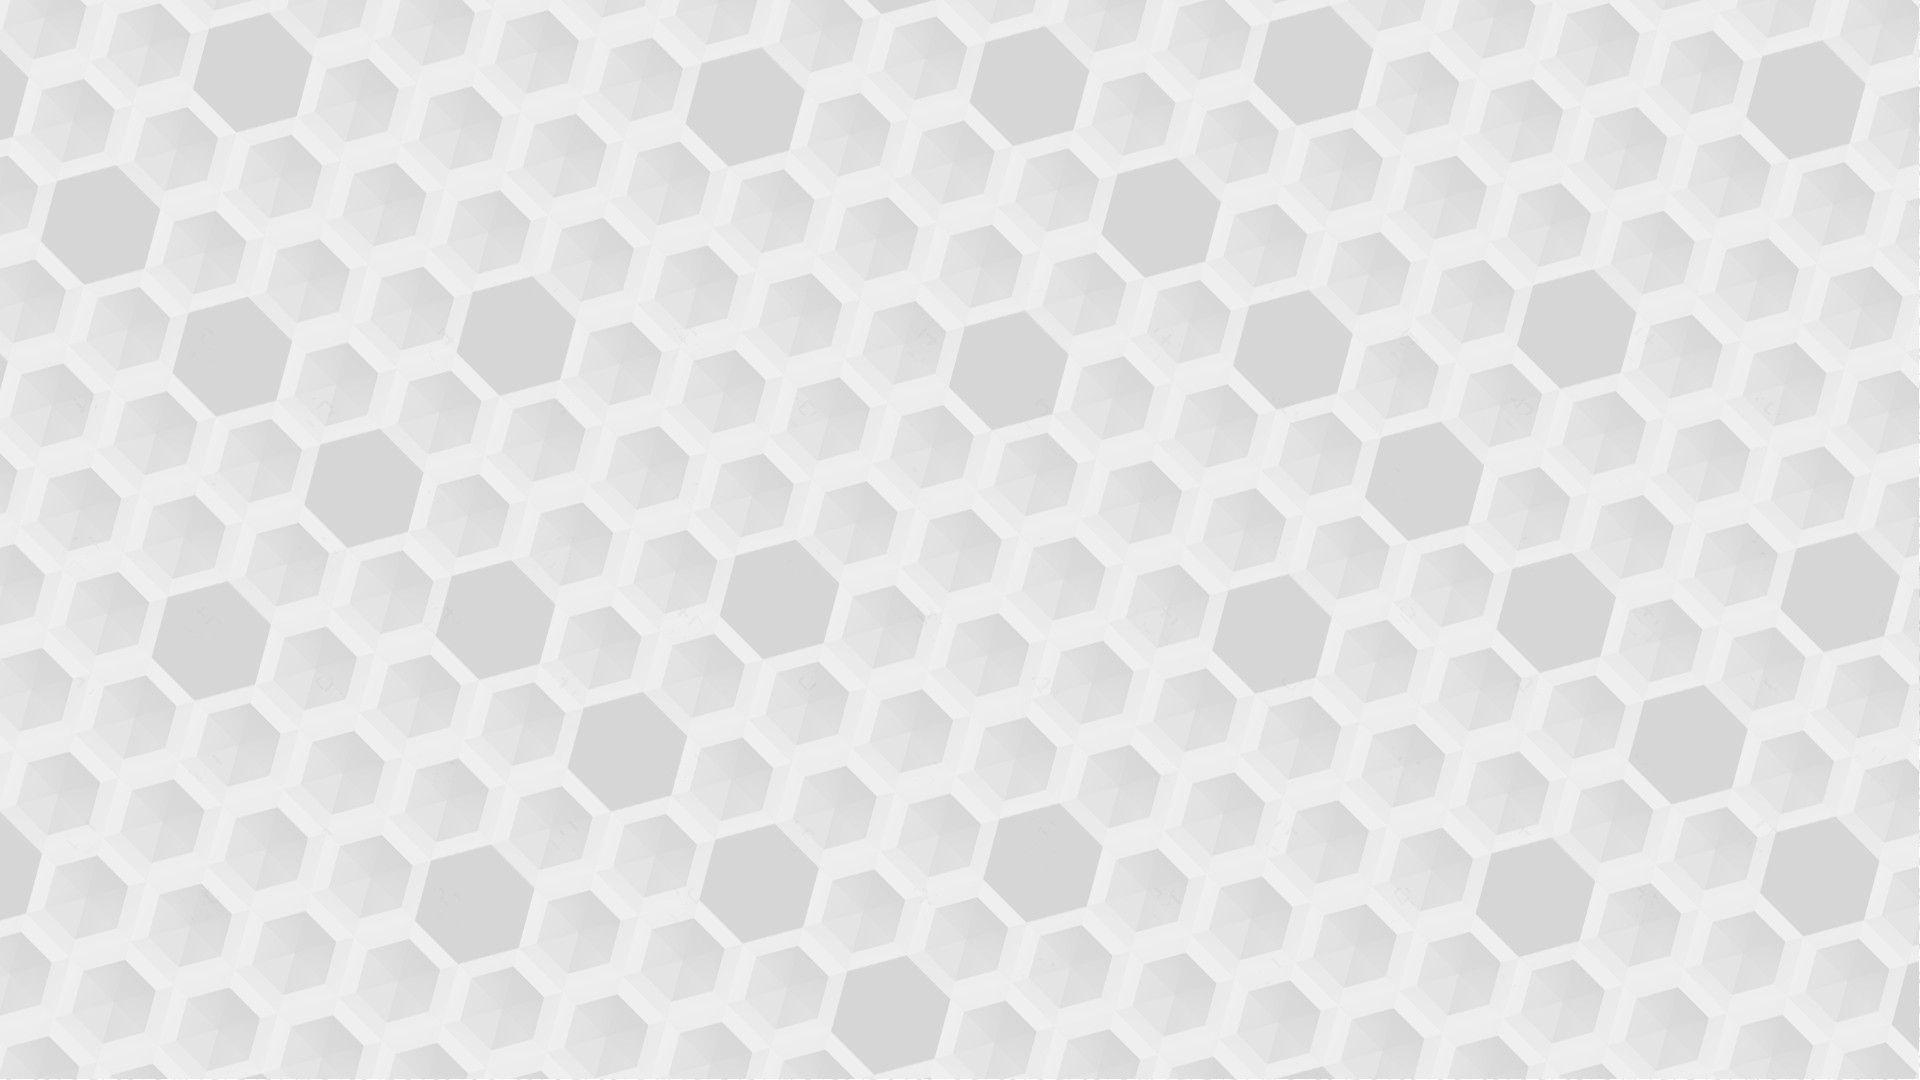 hive, Honeycombs, Hexagon, Bright, White, Simple Wallpaper